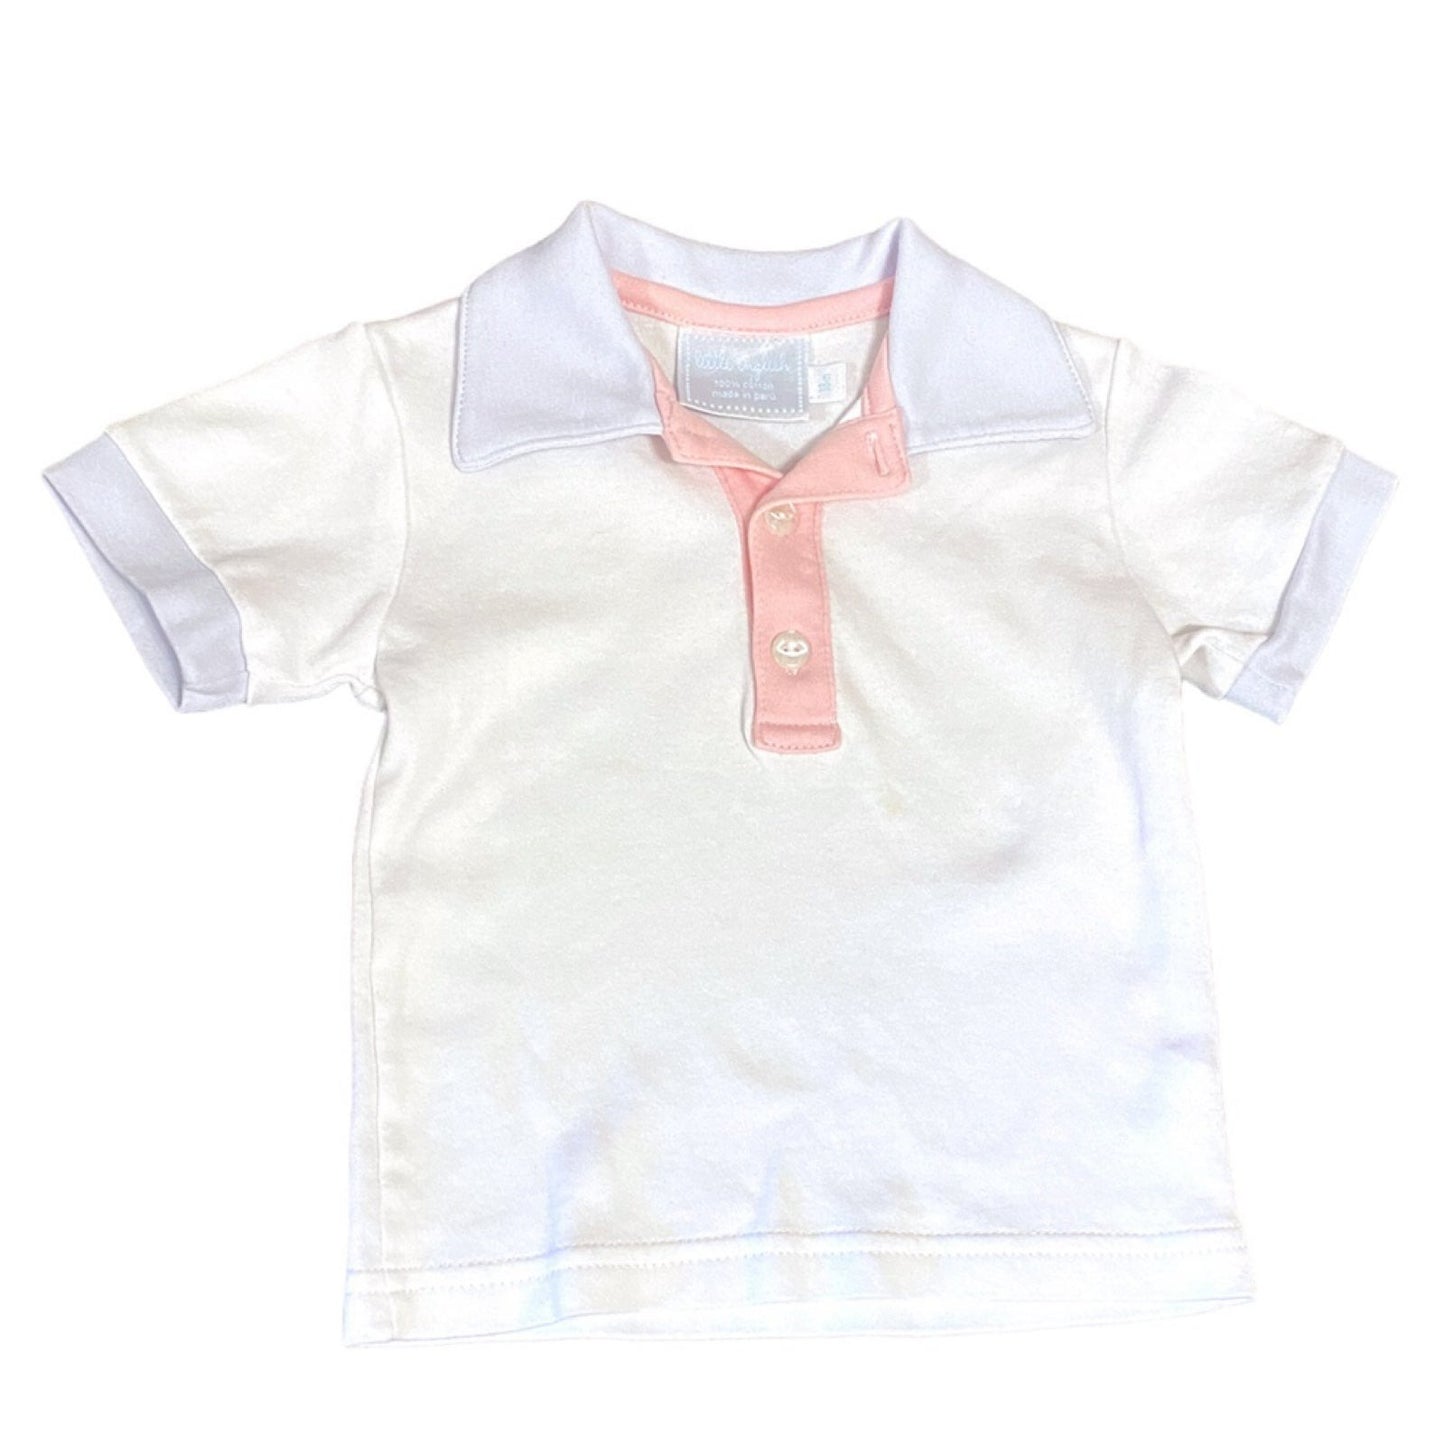 18 months Little English Polo top